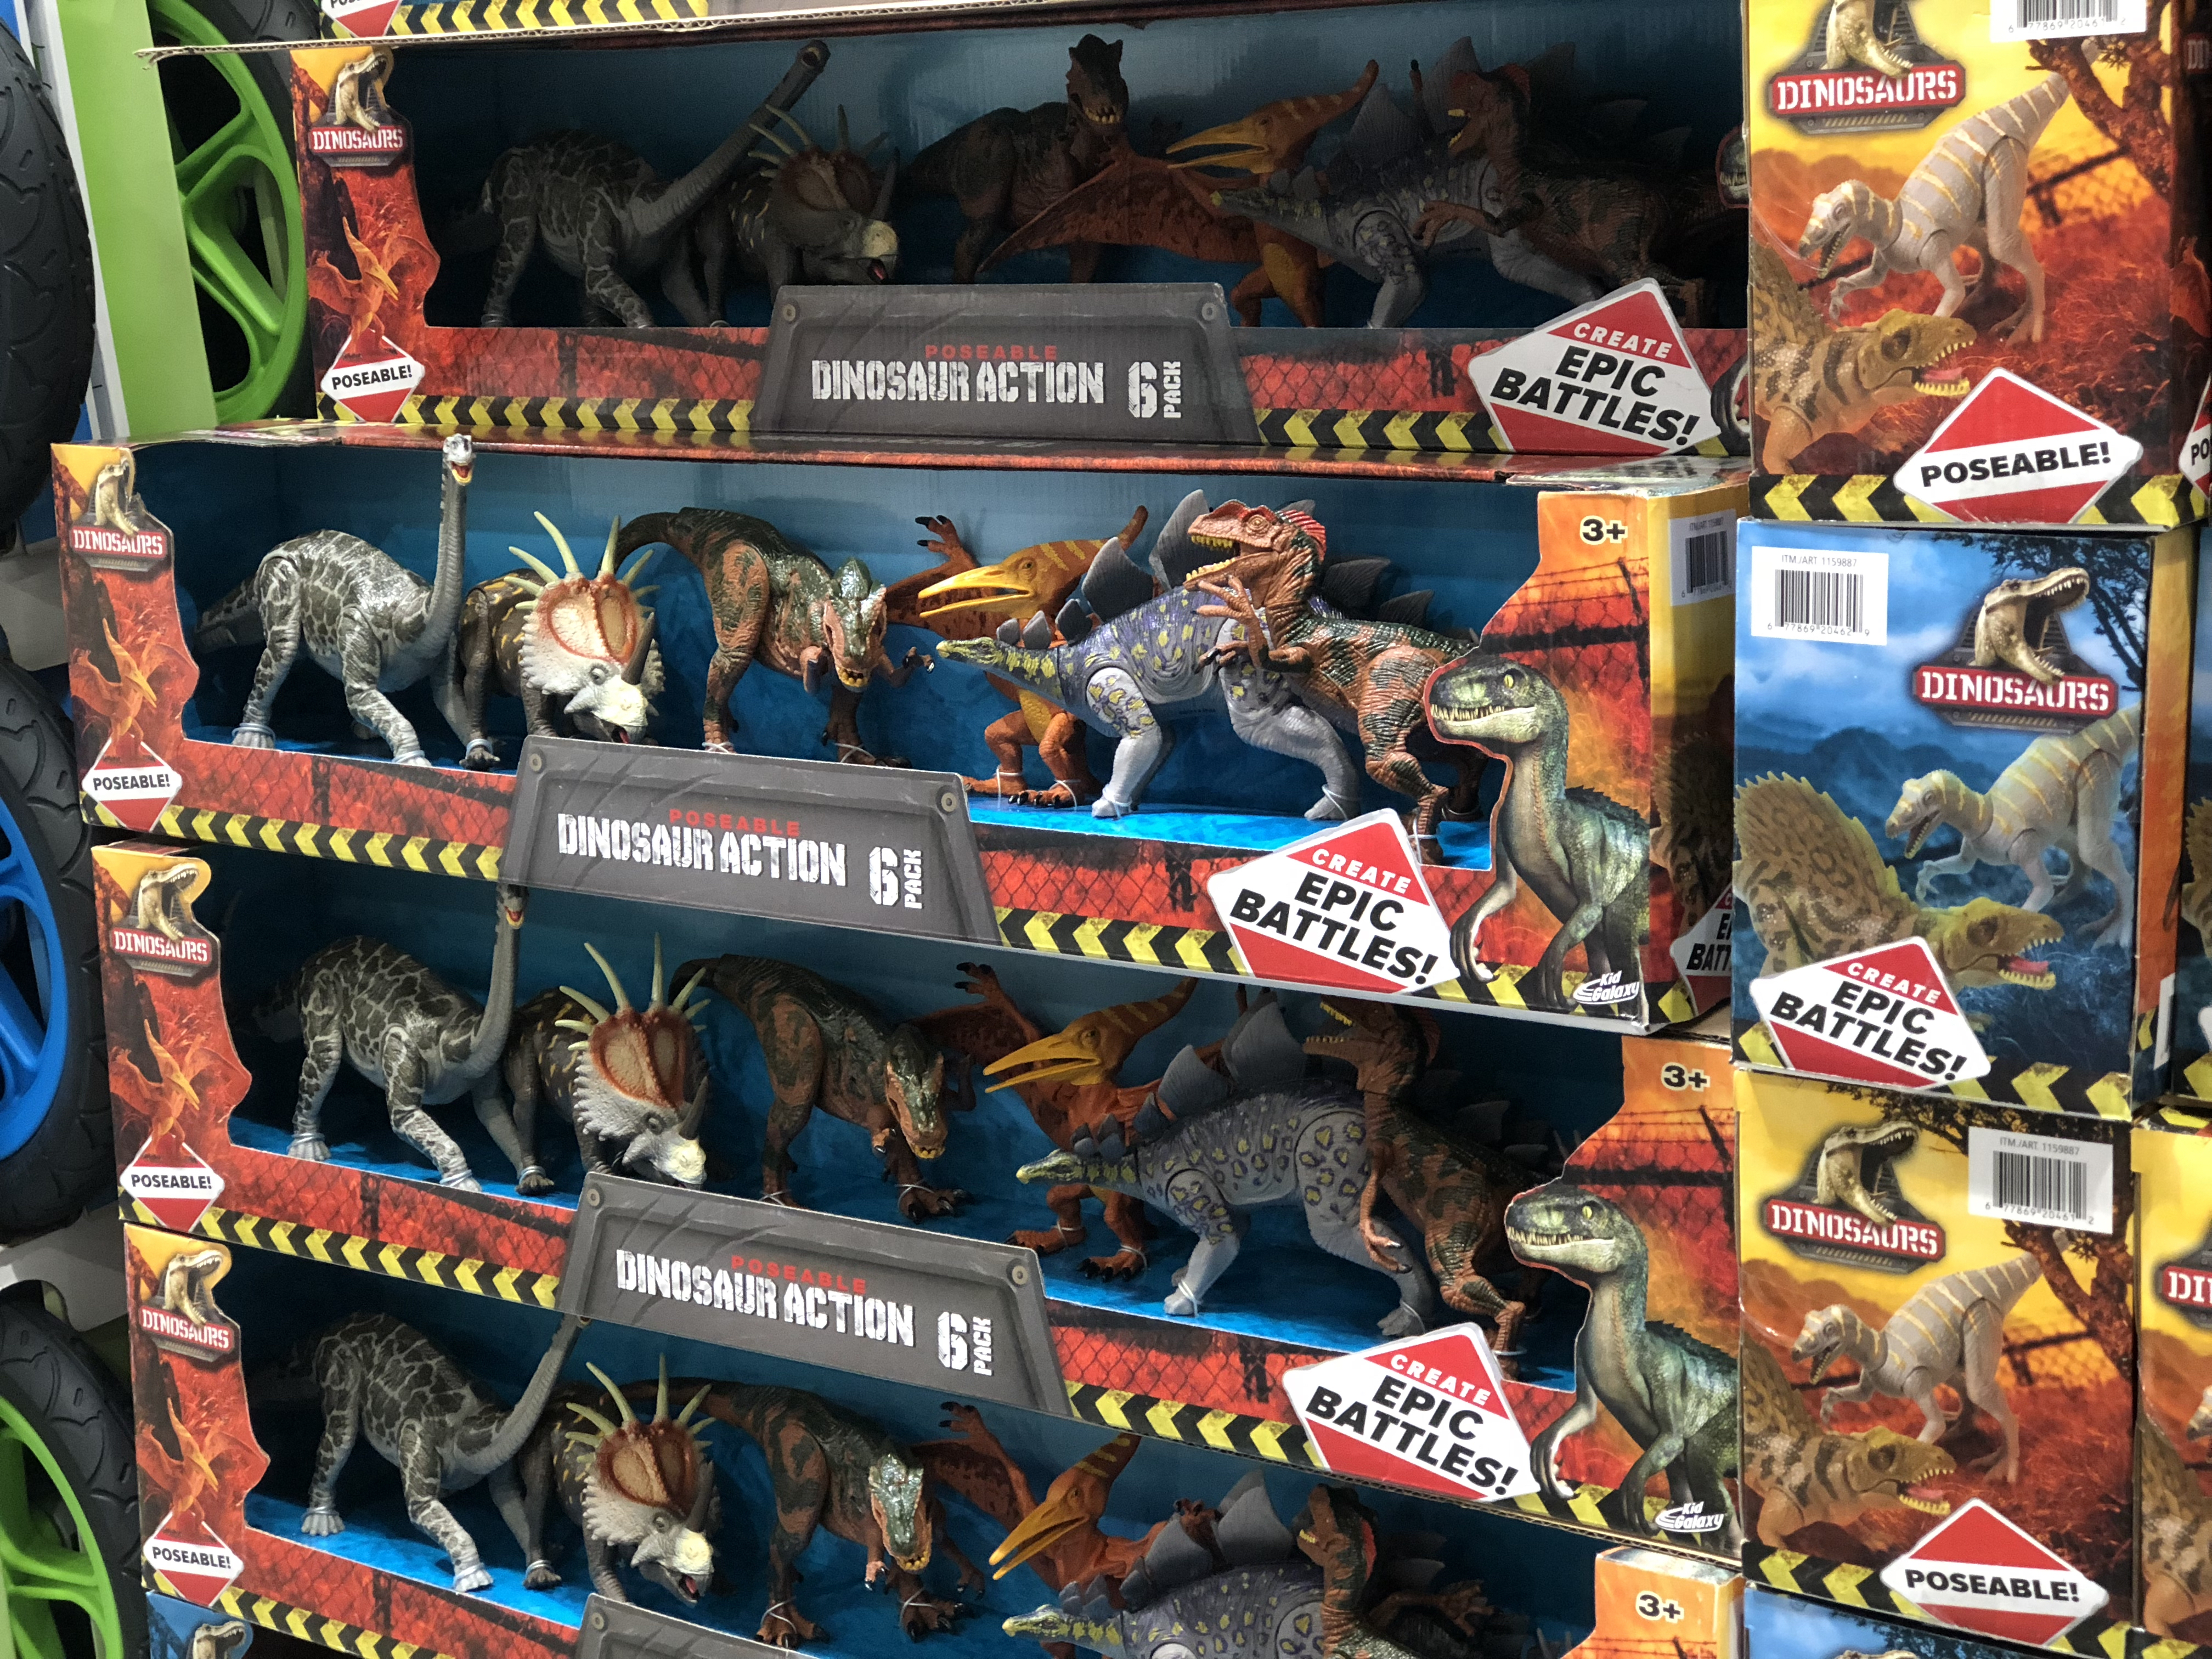 The best holiday toy deals for 2018 include Poseable dinosaurs at Costco